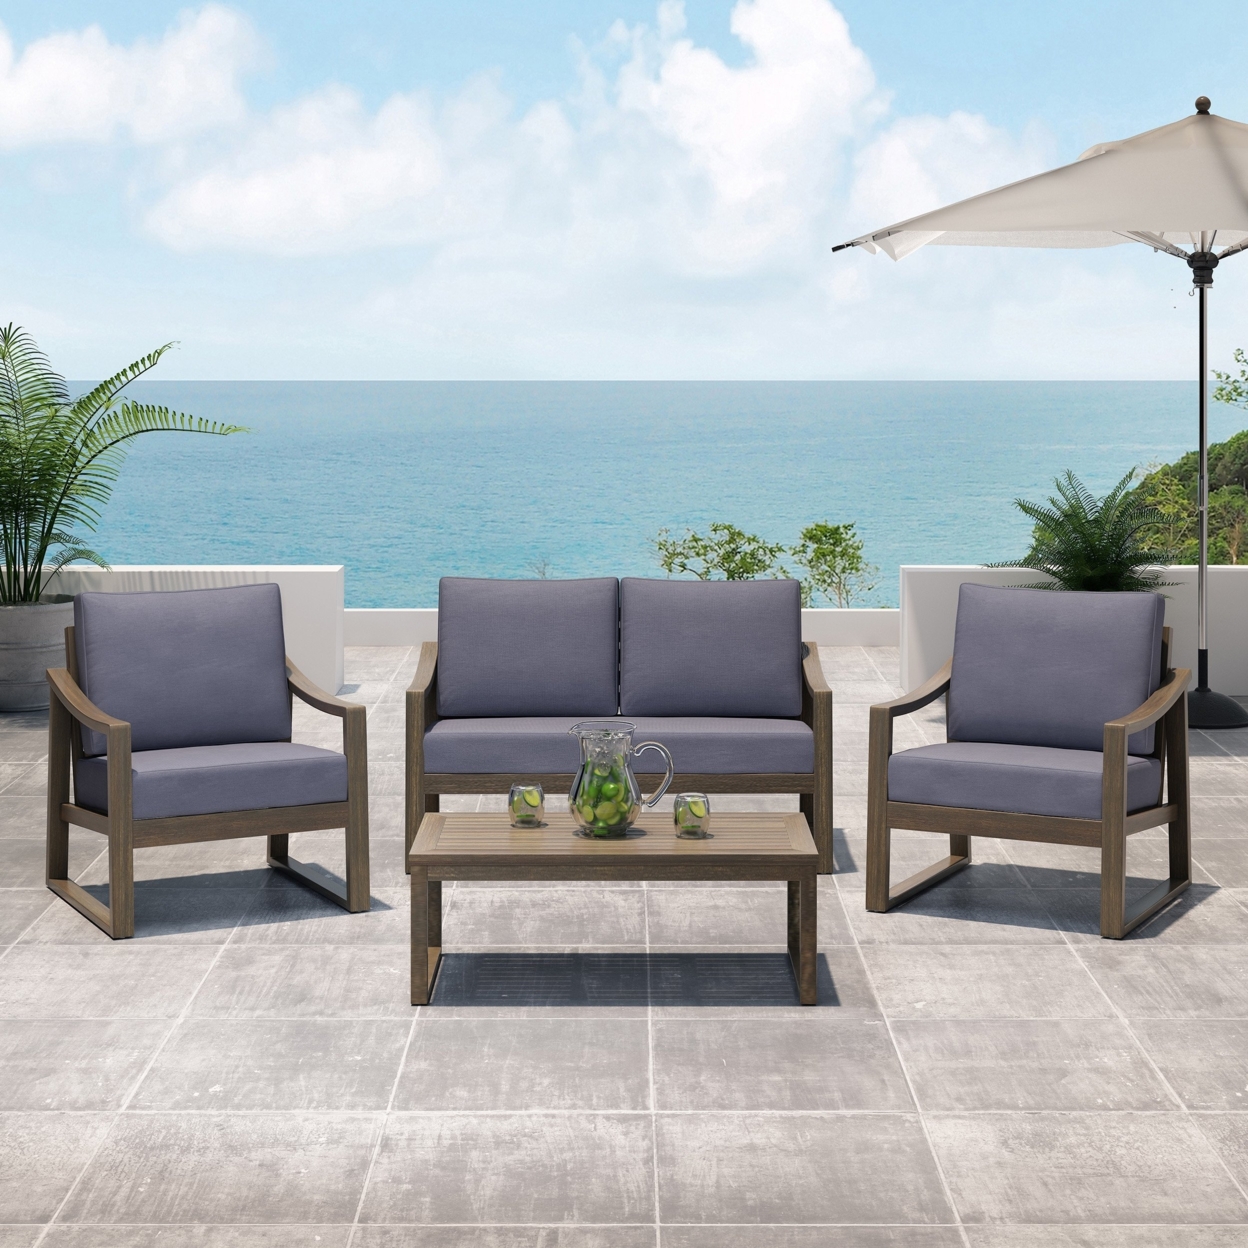 Johnlucas Outdoor 4 Seater Acacia Wood Chat Set With Water Resistant Cushions - Gray/dark Gray